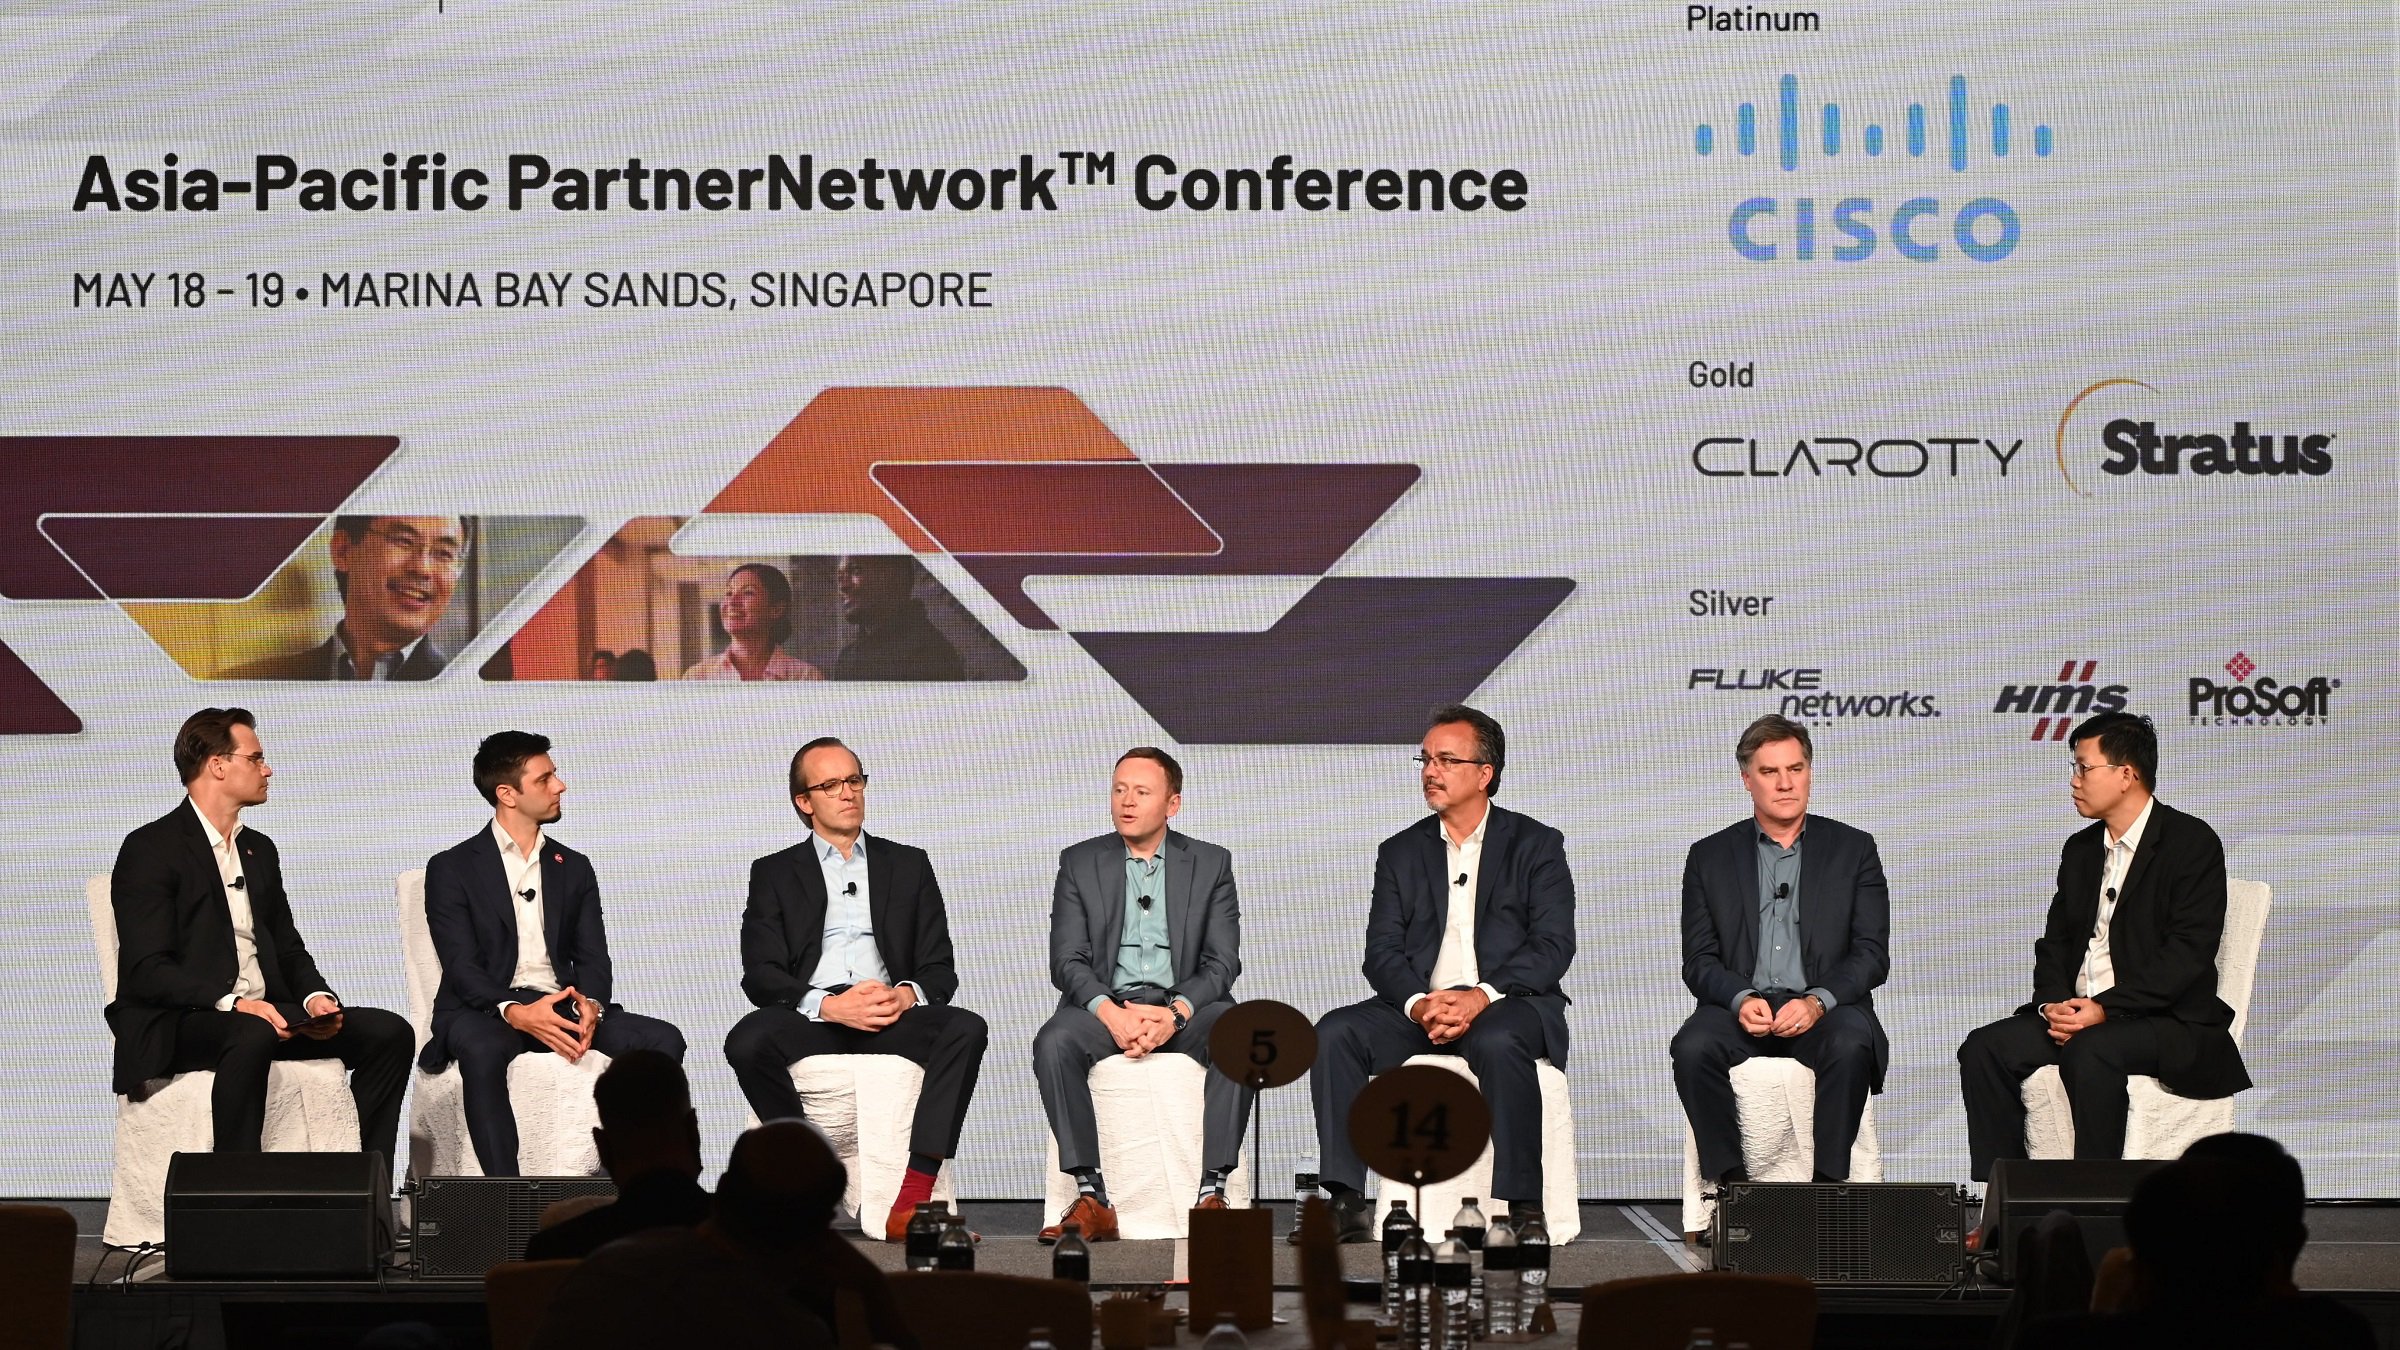 An executive panel discussion during the Asia-Pacific PartnerNetwork Conference 2022, held in Singapore from May 18-19.